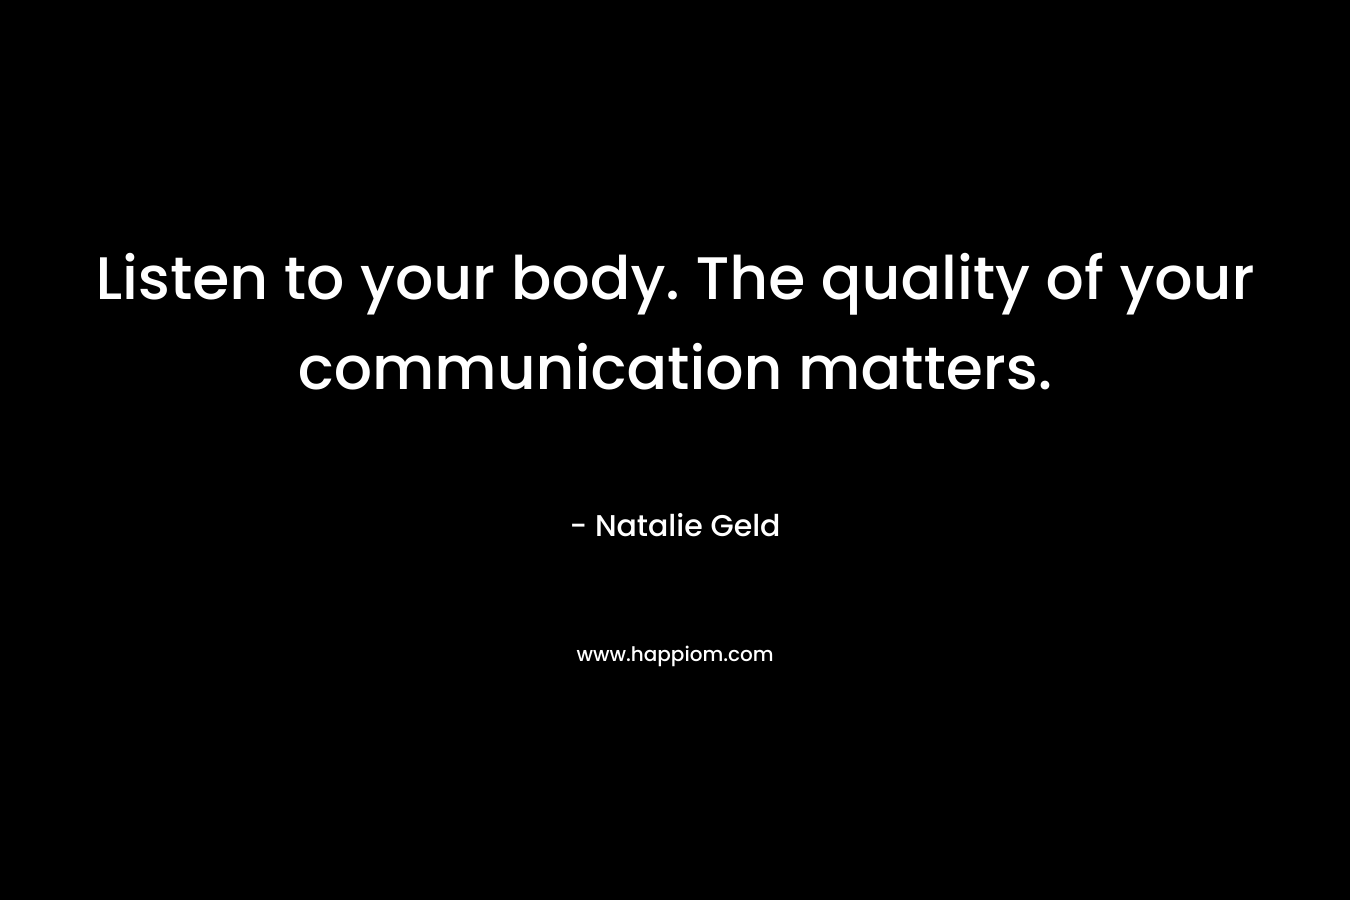 Listen to your body. The quality of your communication matters.